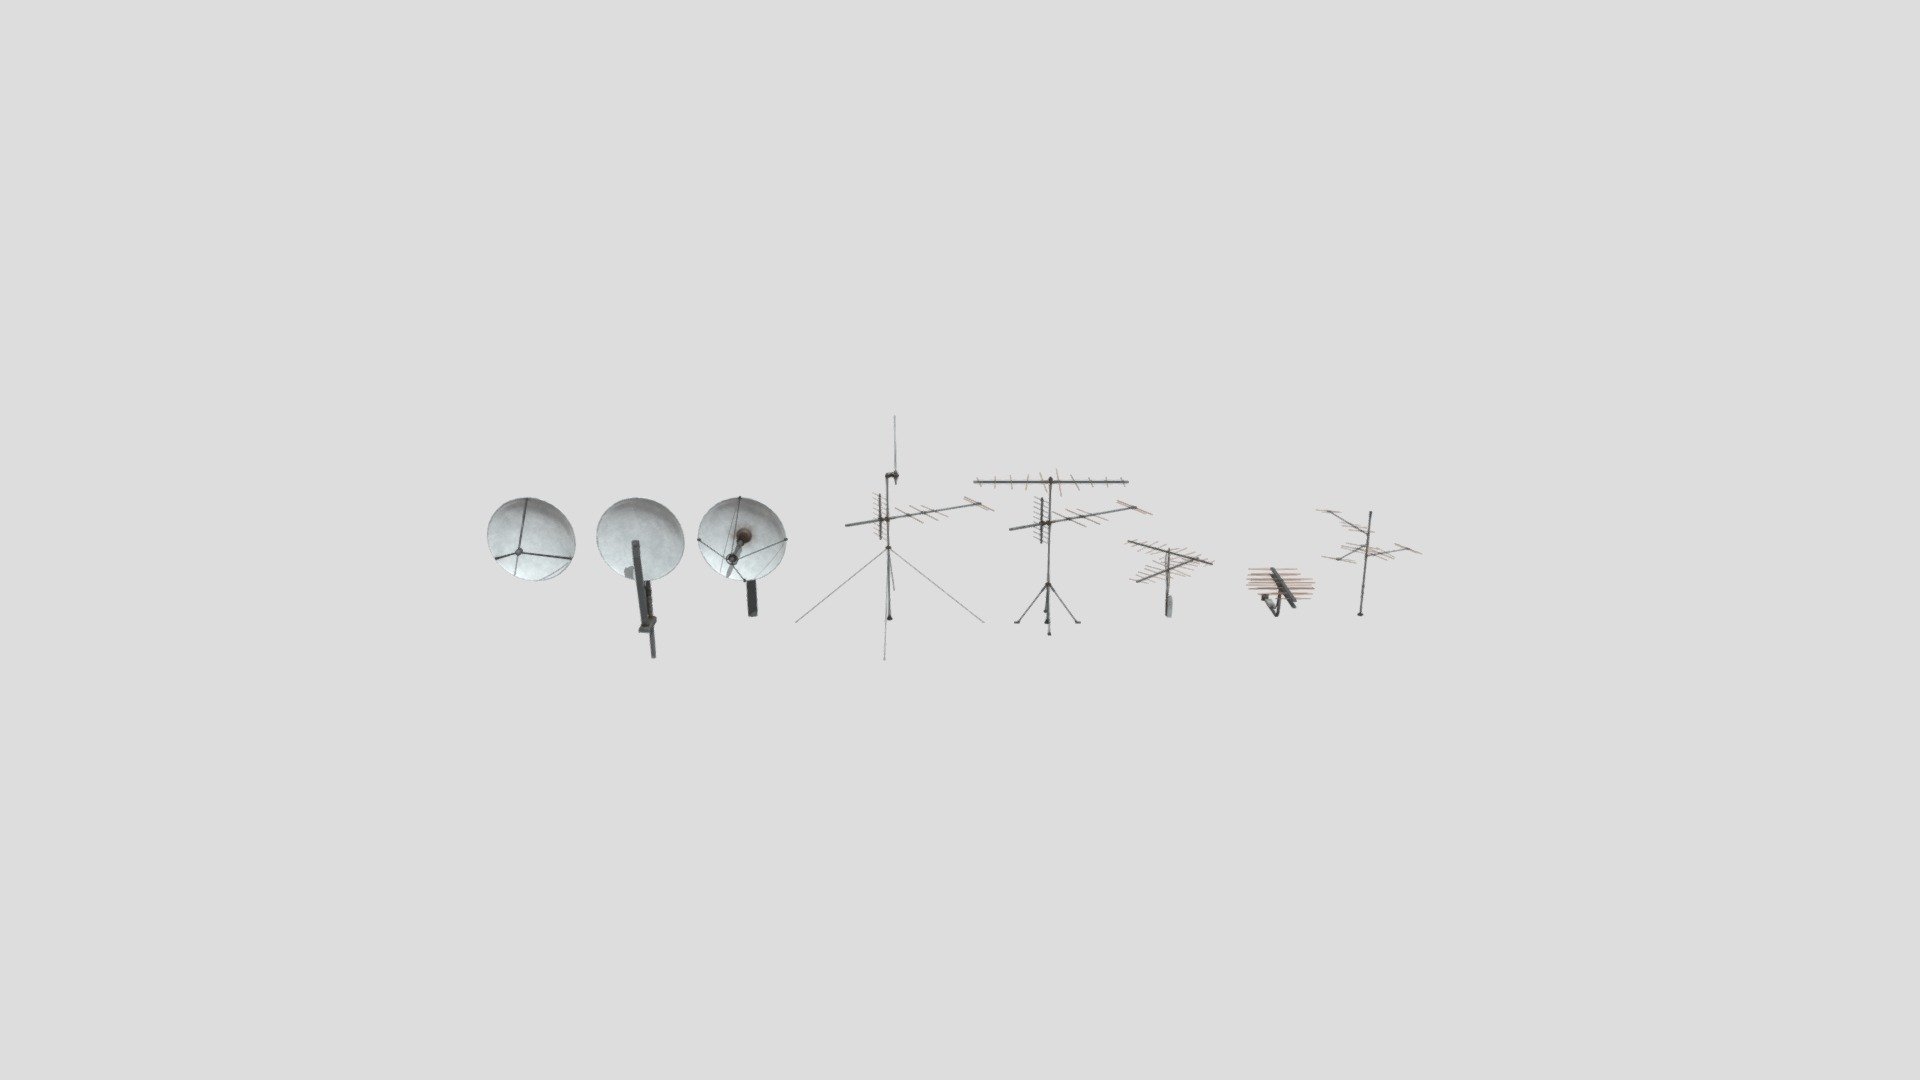 This Antenna and Radio pack contains:

3 Radio Dishes
5 Antennas
All of the meshes are seperated for ease of use and share 1 PBR 4k texture. The models have been UV Unwrapped for future texturing and have accompaning vertex colors 3d model